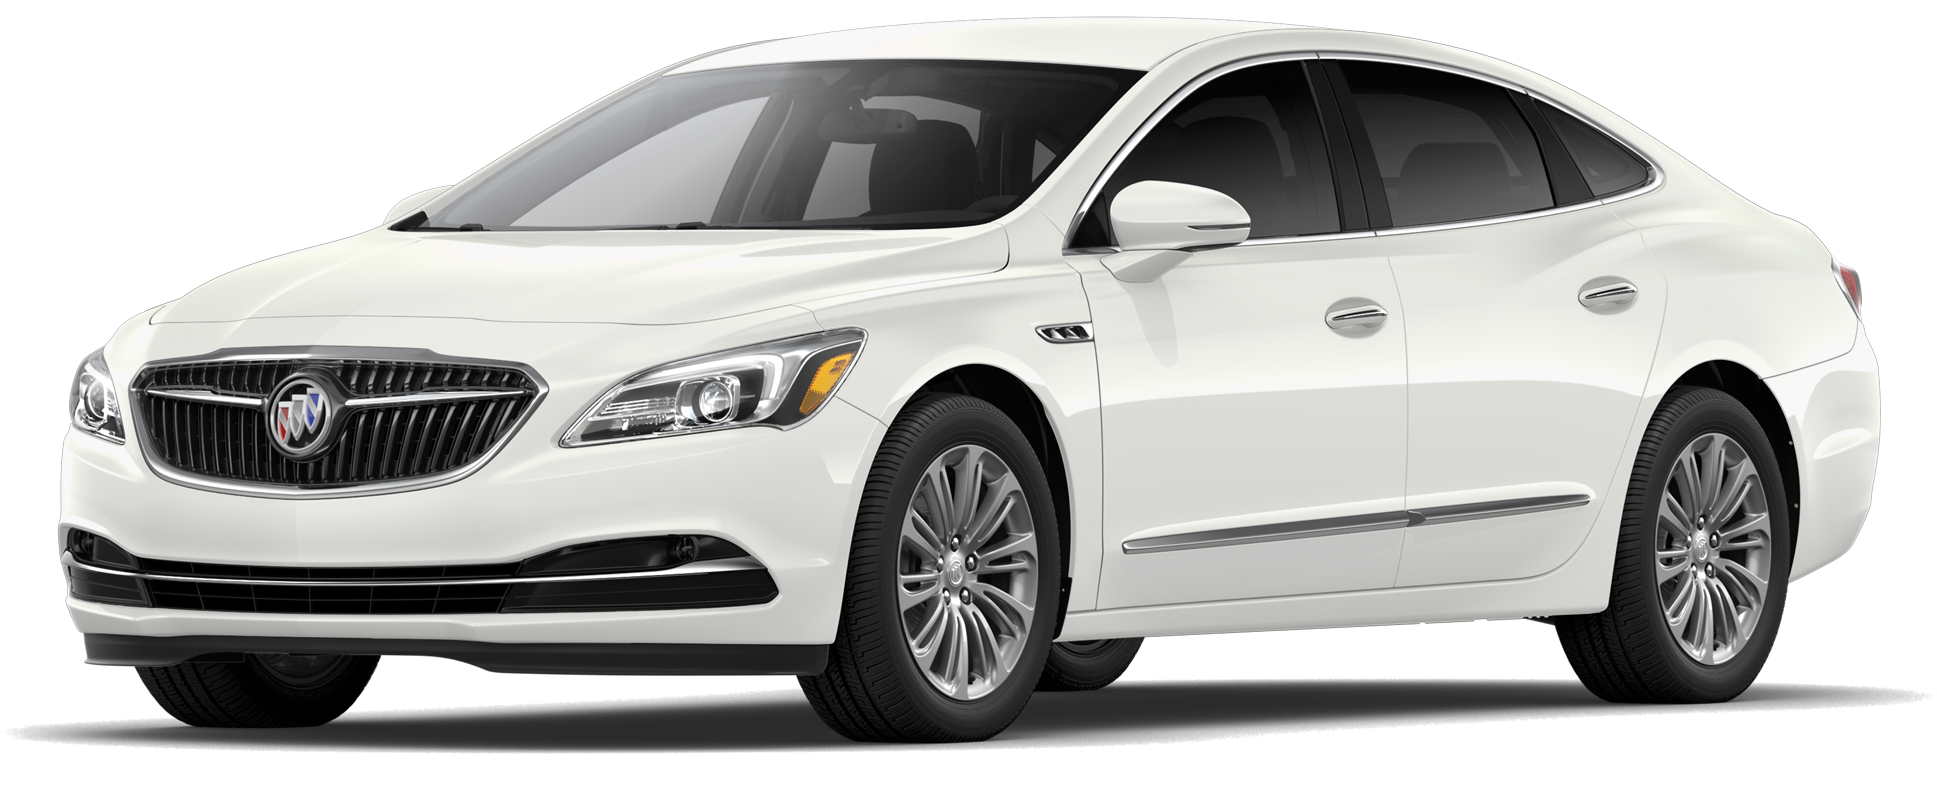 2019 Buick LaCrosse Incentives, Specials & Offers in Lansing MI